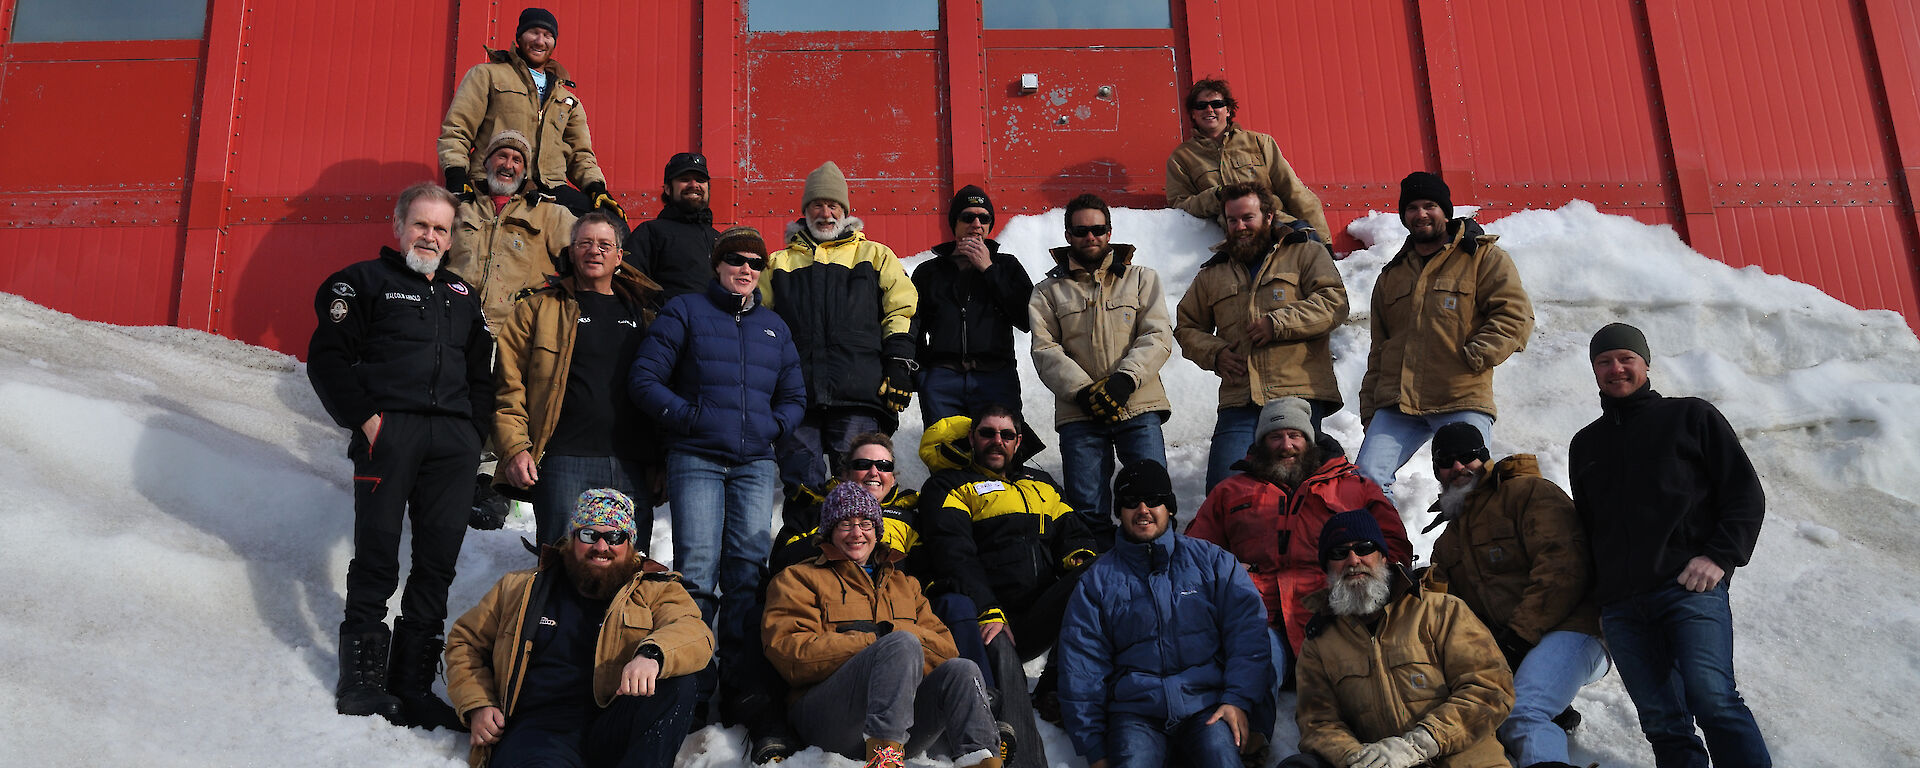 Twenty one people standing and sitting on the snow down wind of the red living quarters